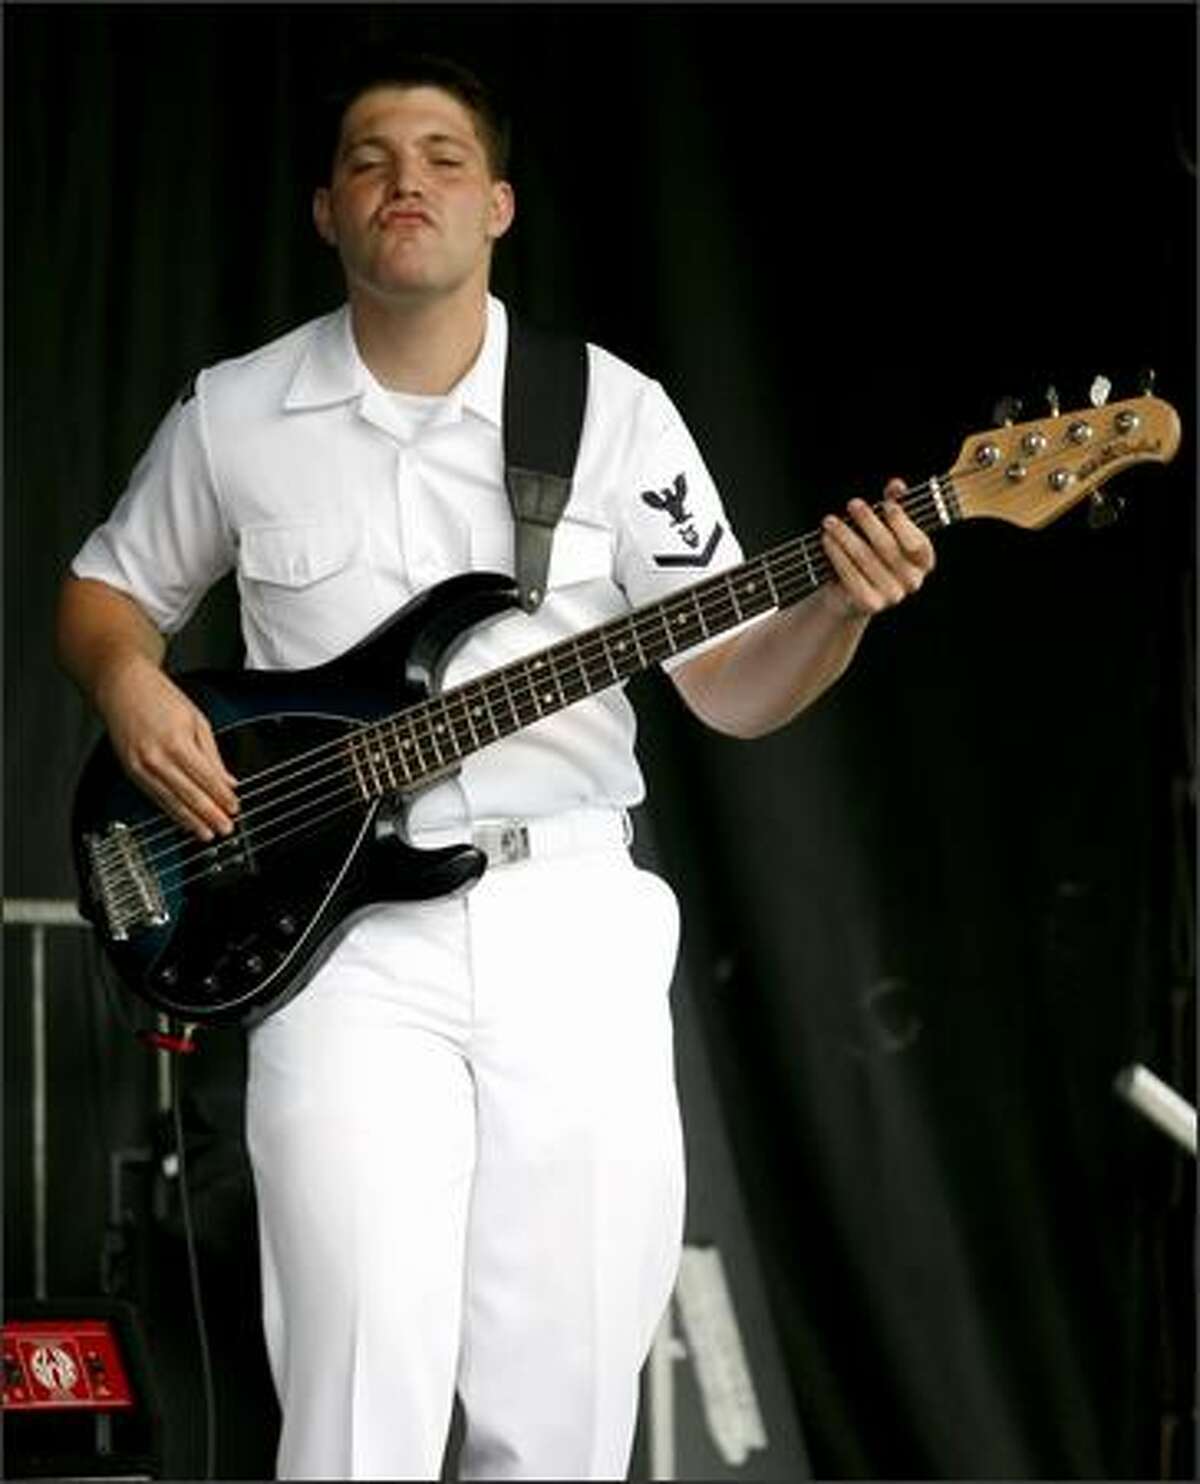 The South by Northwest bass guitar player gets his groove on at Seafair on Saturday. (Kristine Paulsen/P-I)